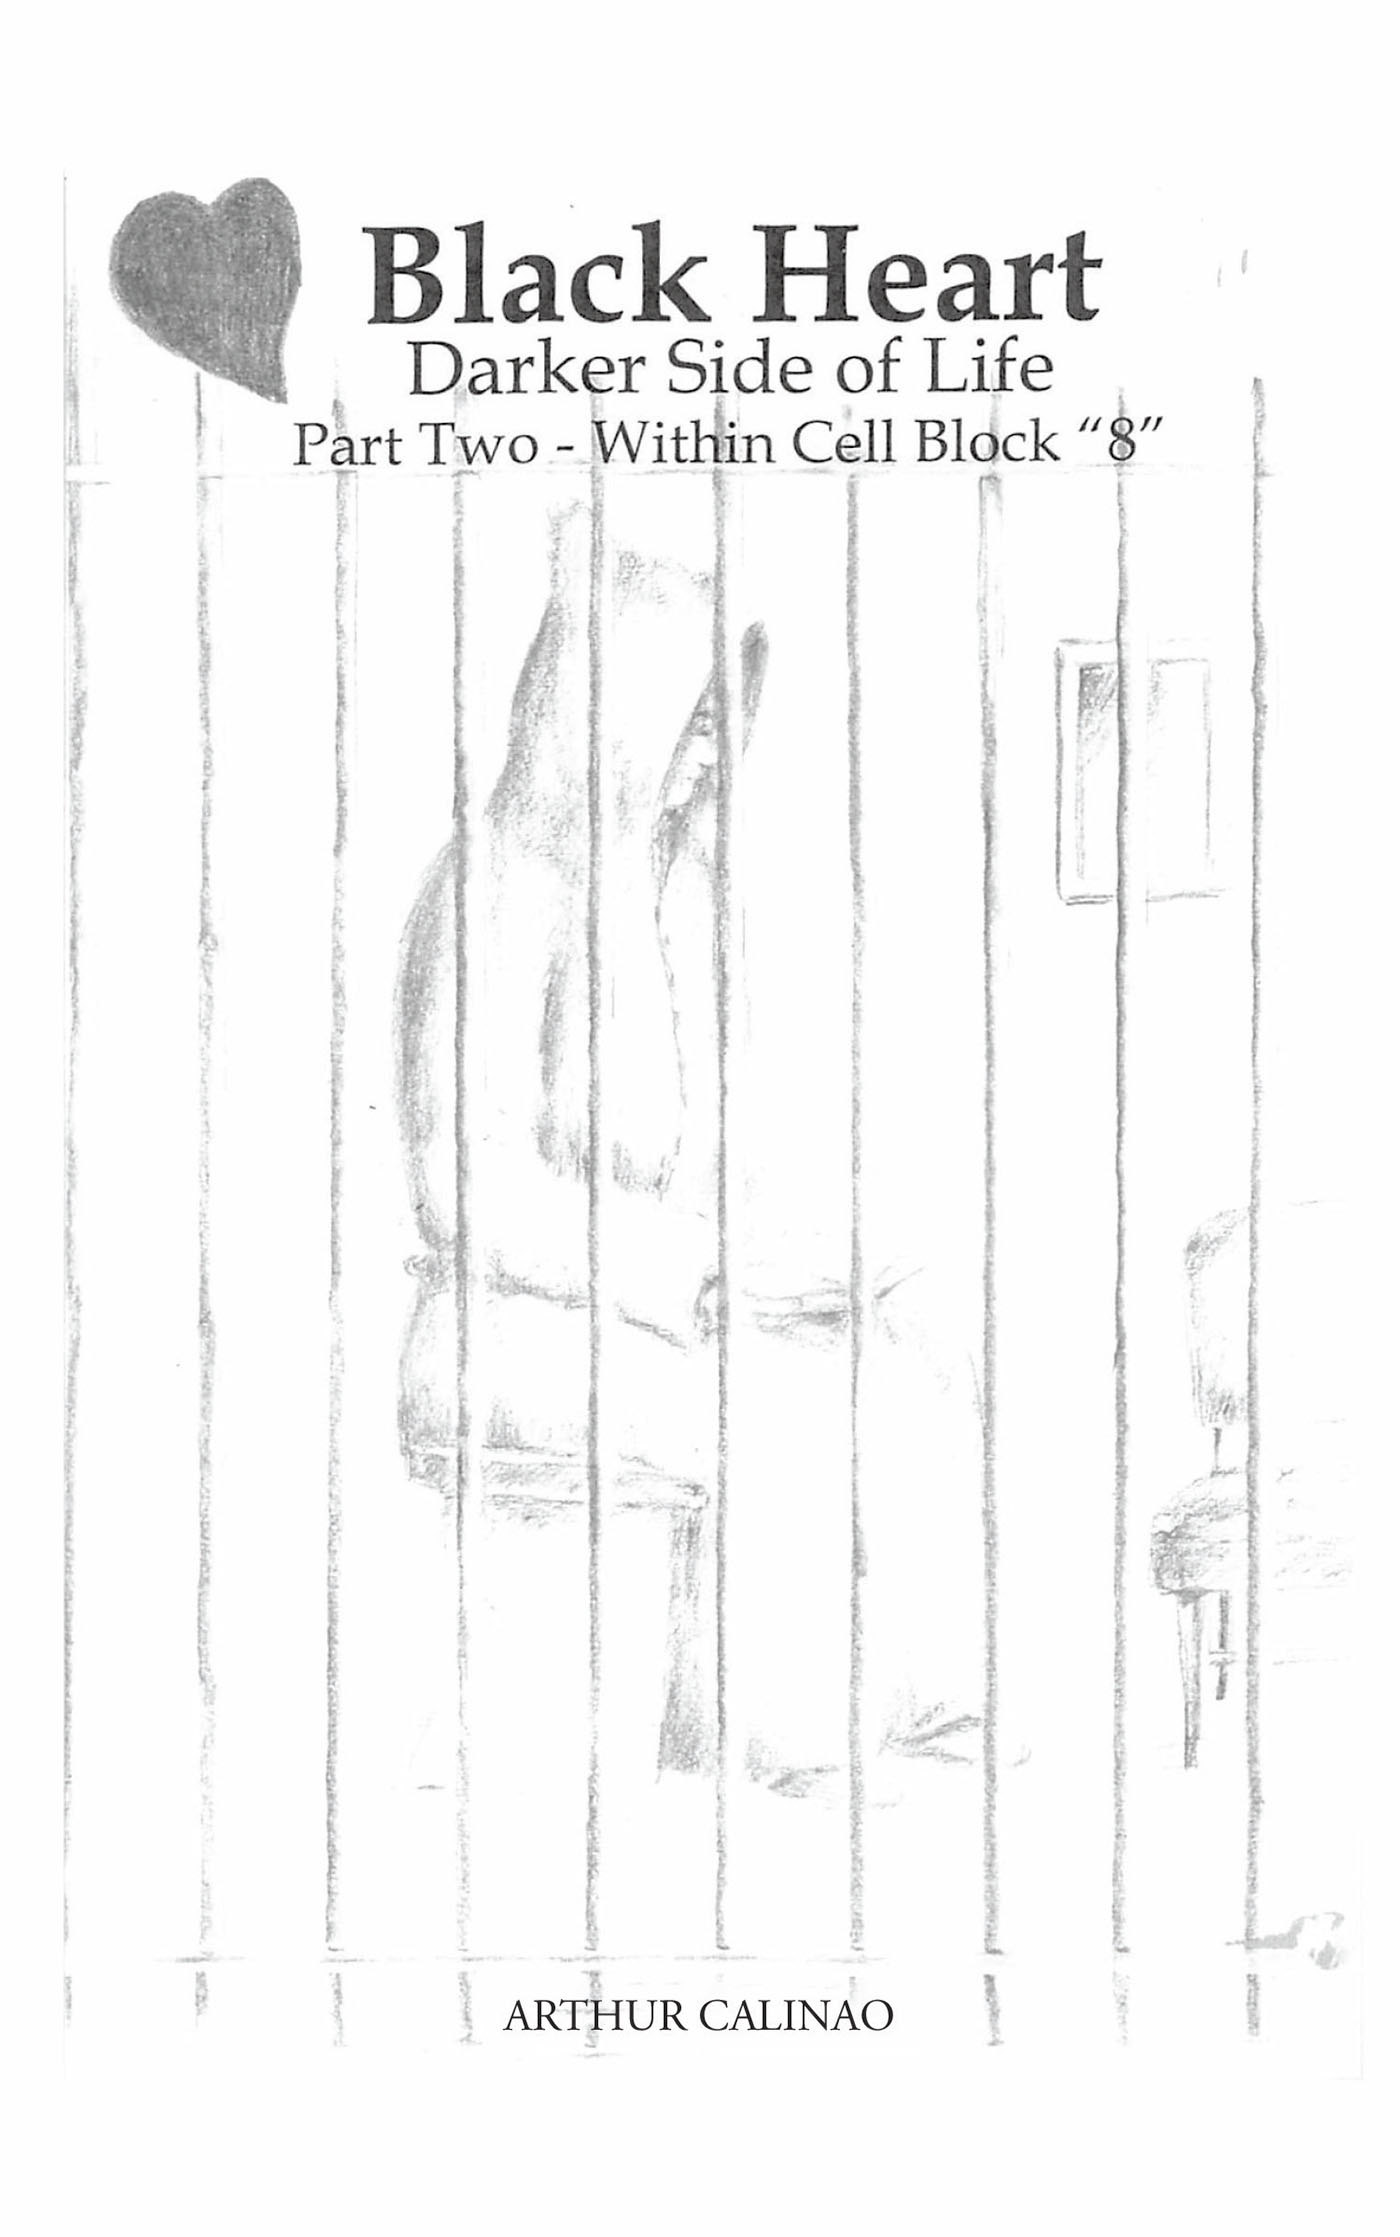 Arthur Calinao’s New Book, "Black Heart: Darker Side of Life: Part Two: Within Cell Block ‘8,’" Centers Around a Prisoner's Relationship with His Cellmate, a Priest